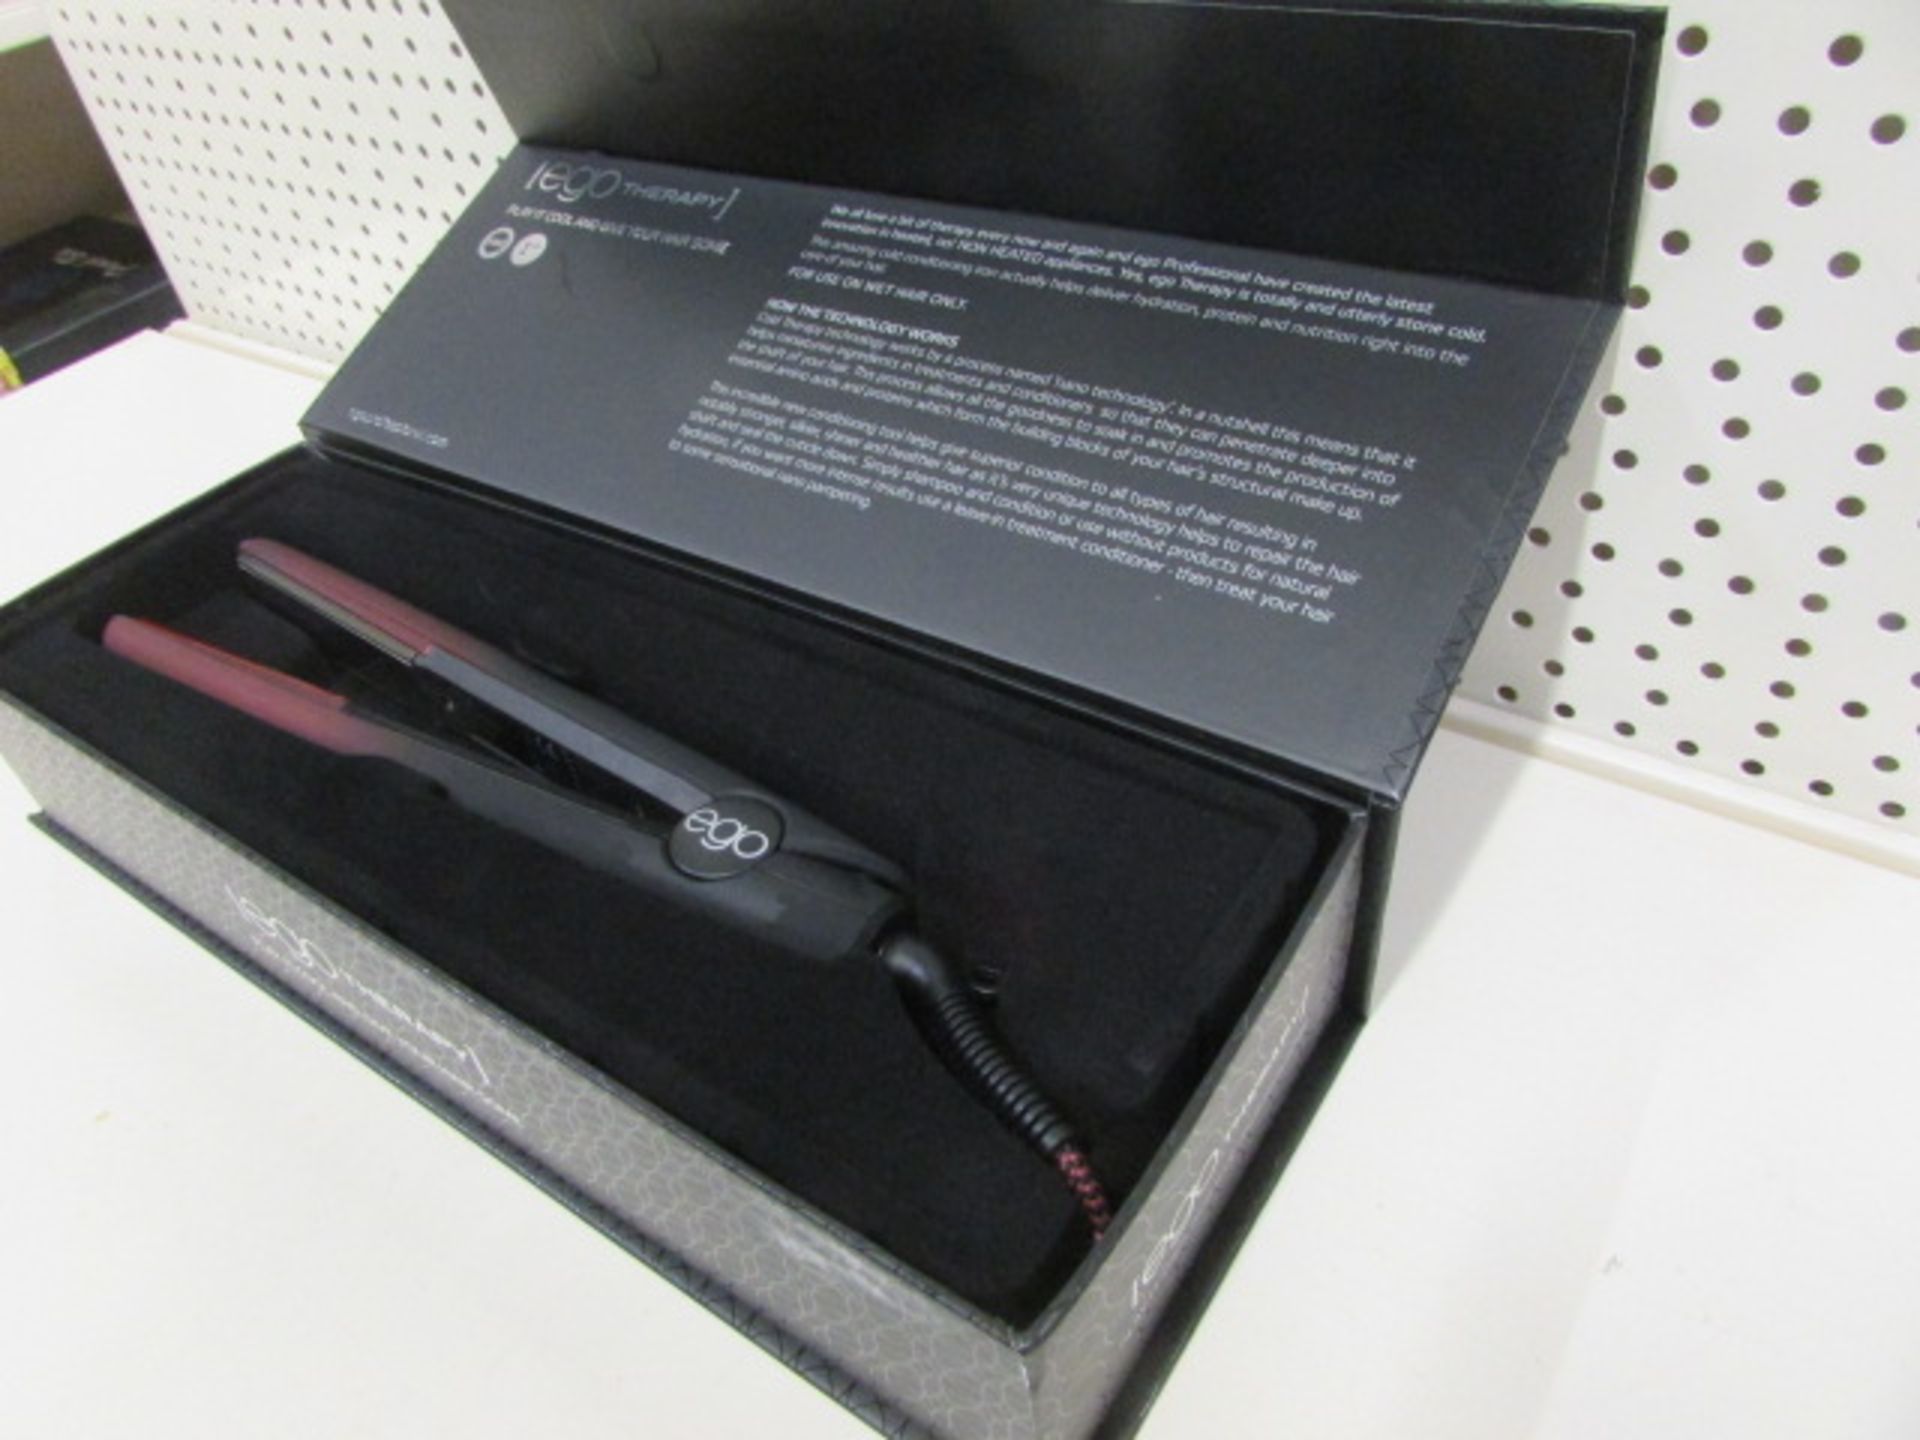 1 X Ego Professional Ego Therapy Cold Iron [Brand New] - Image 3 of 5